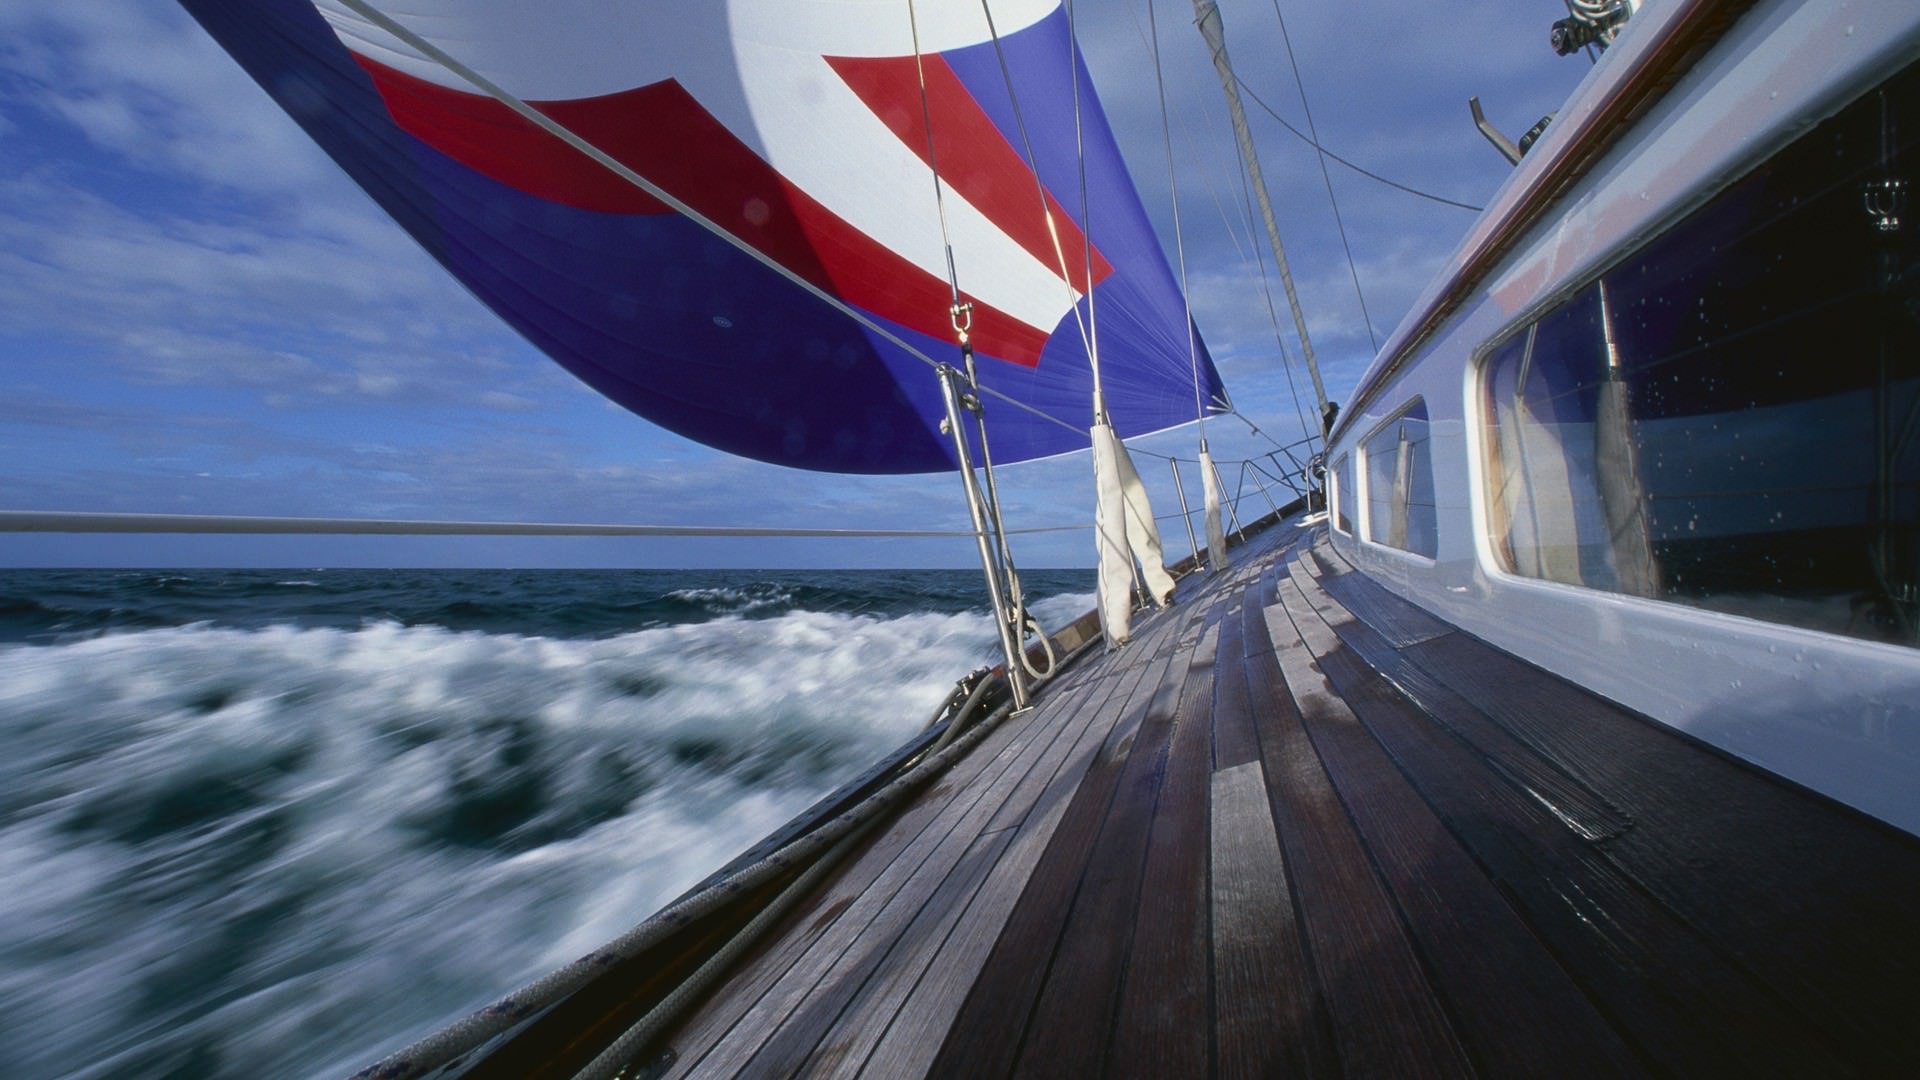 21 Sailing Wallpapers, Backgrounds, Images FreeCreatives